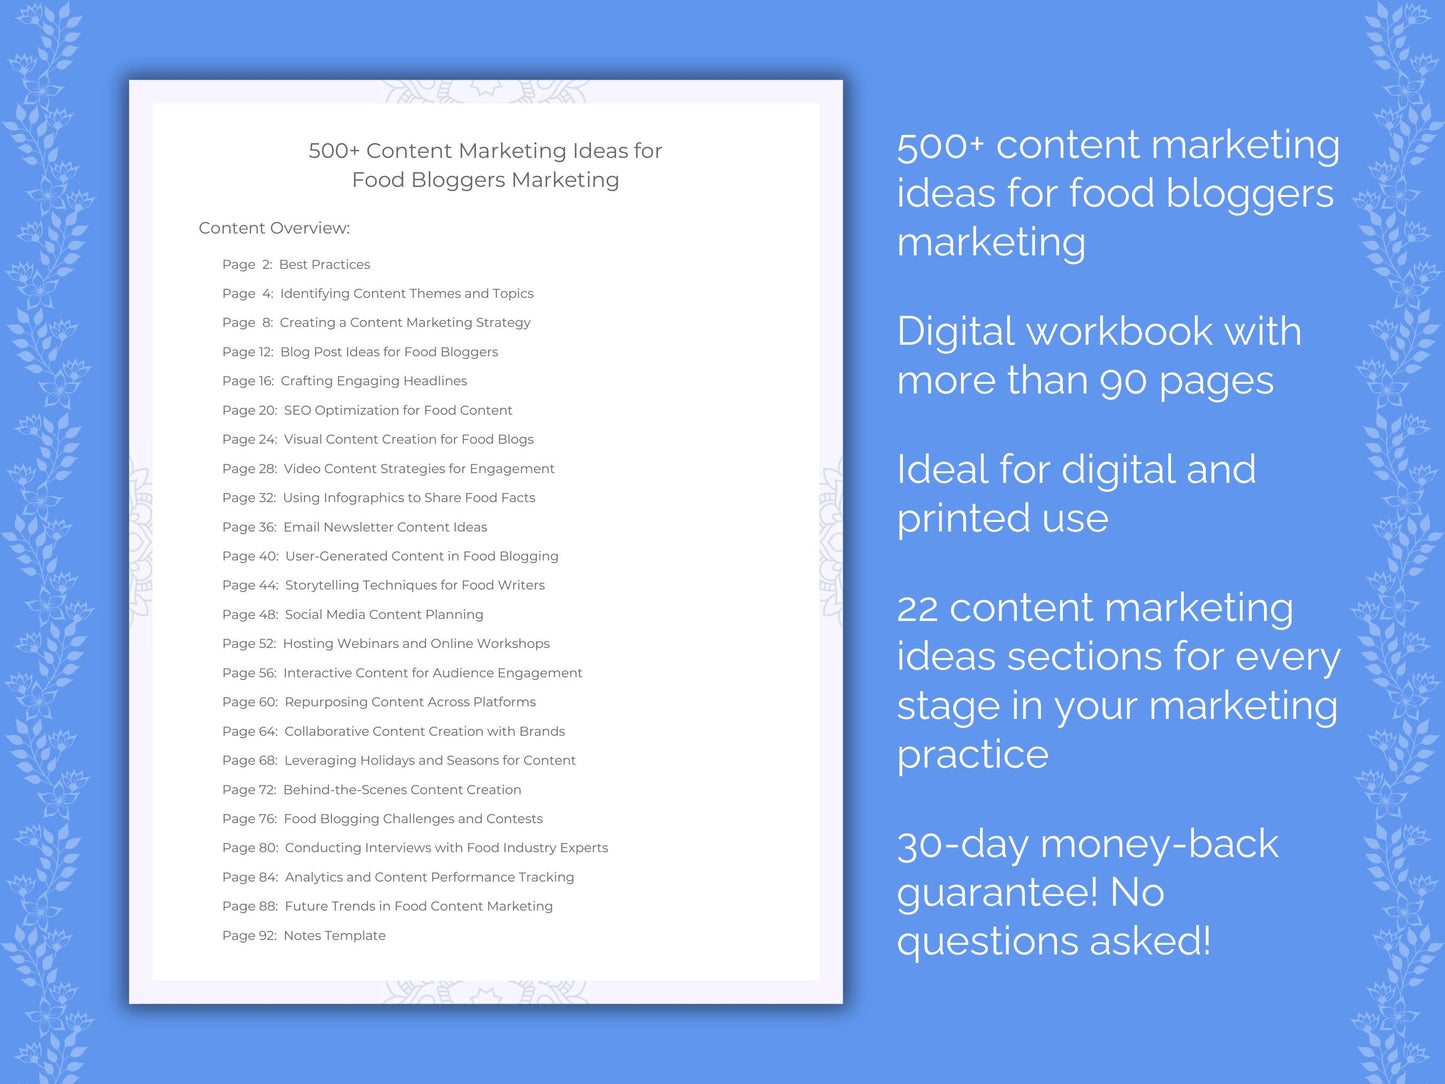 Food Bloggers Content Marketing Ideas Resource